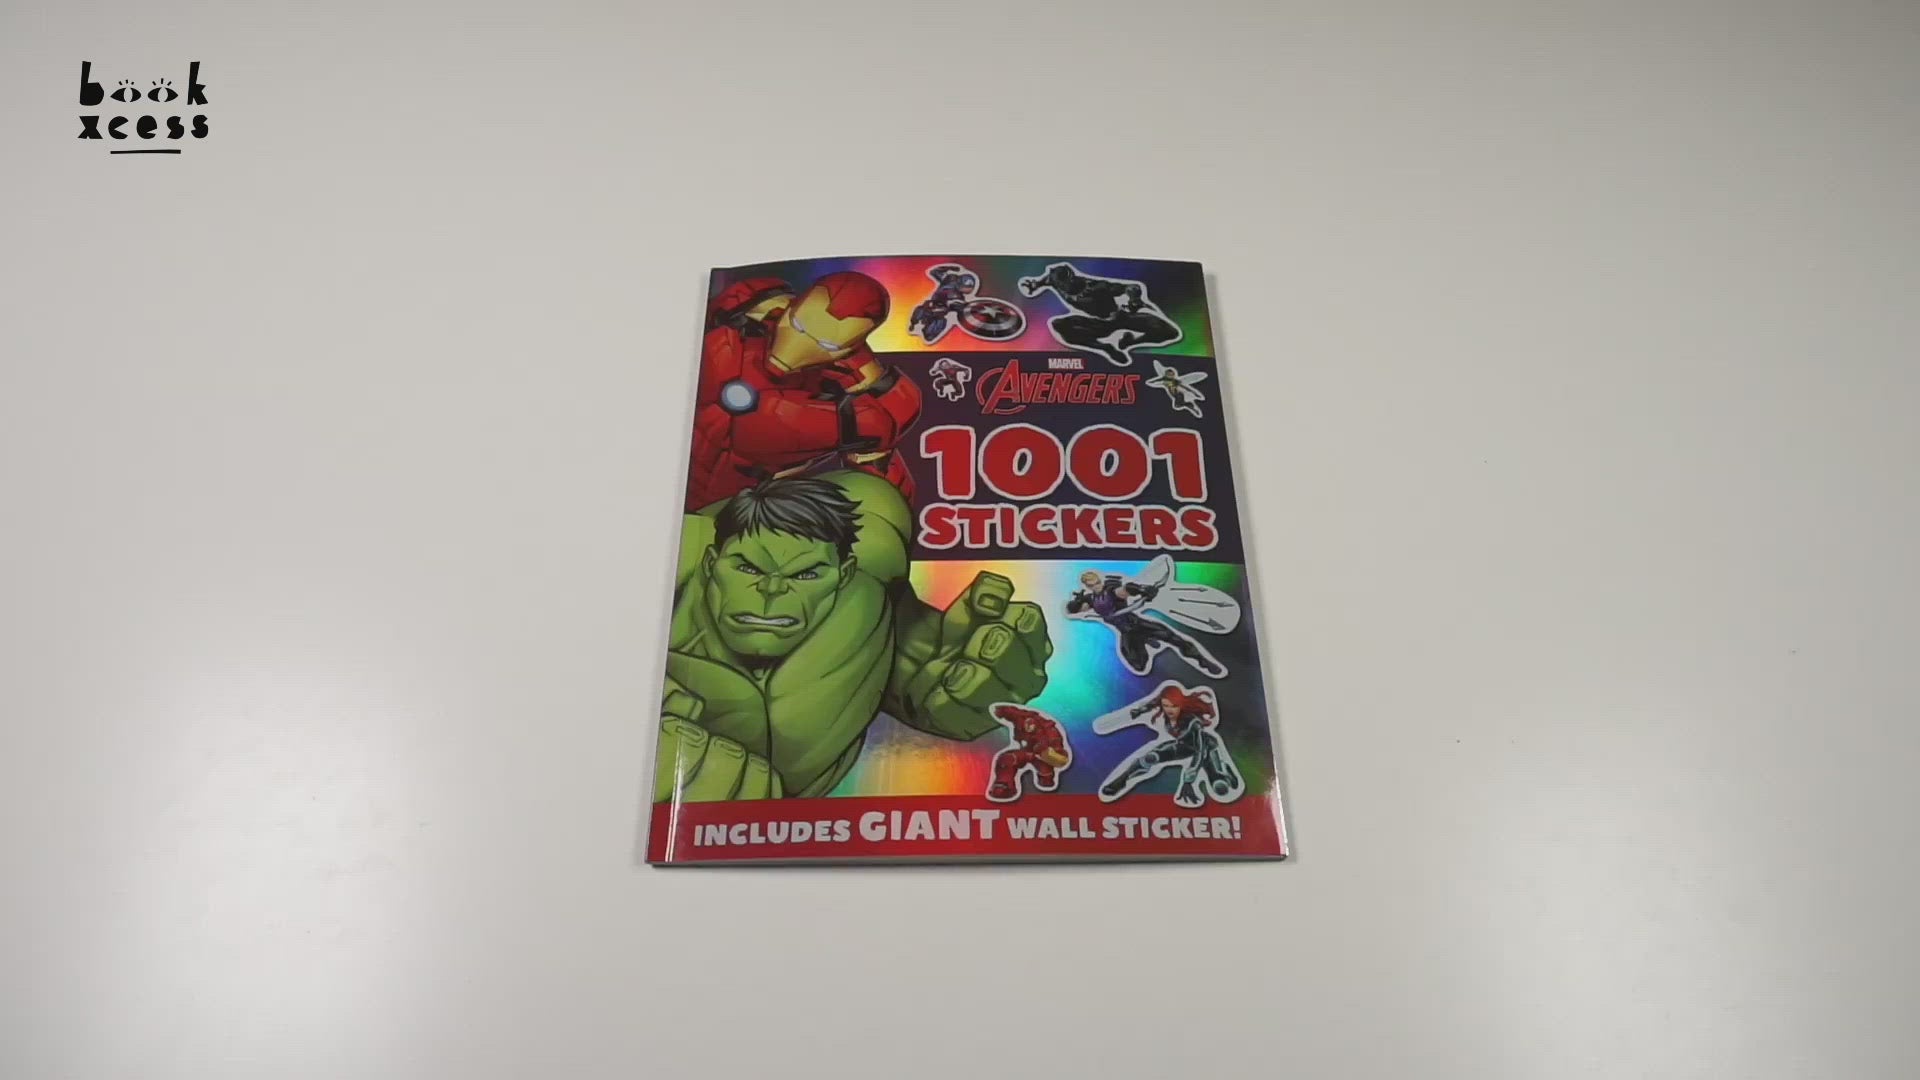 Marvel Avenger 1001 Stickers (Includes Giant Wall Sticker!) 